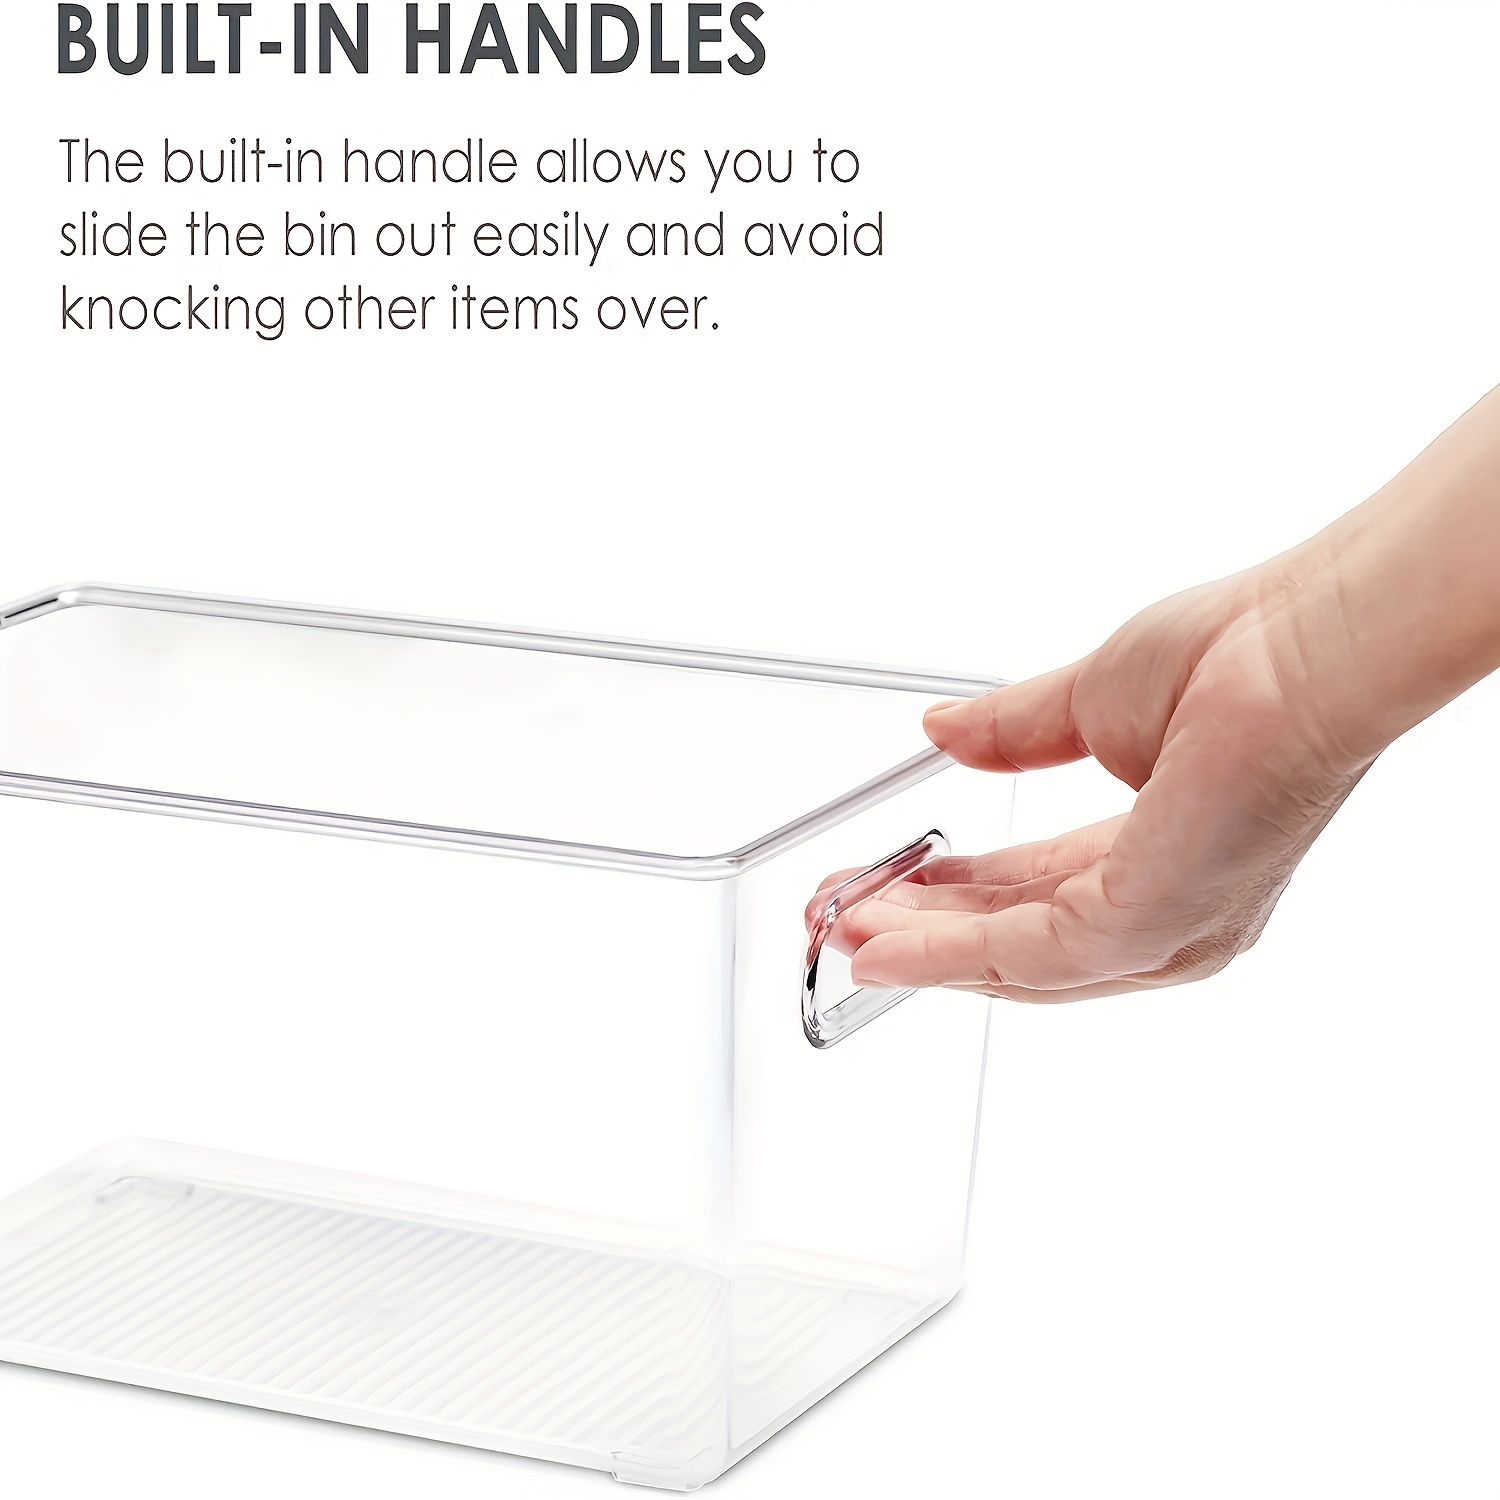 CLEAR PLASTIC STACKING BINS 3 PACK